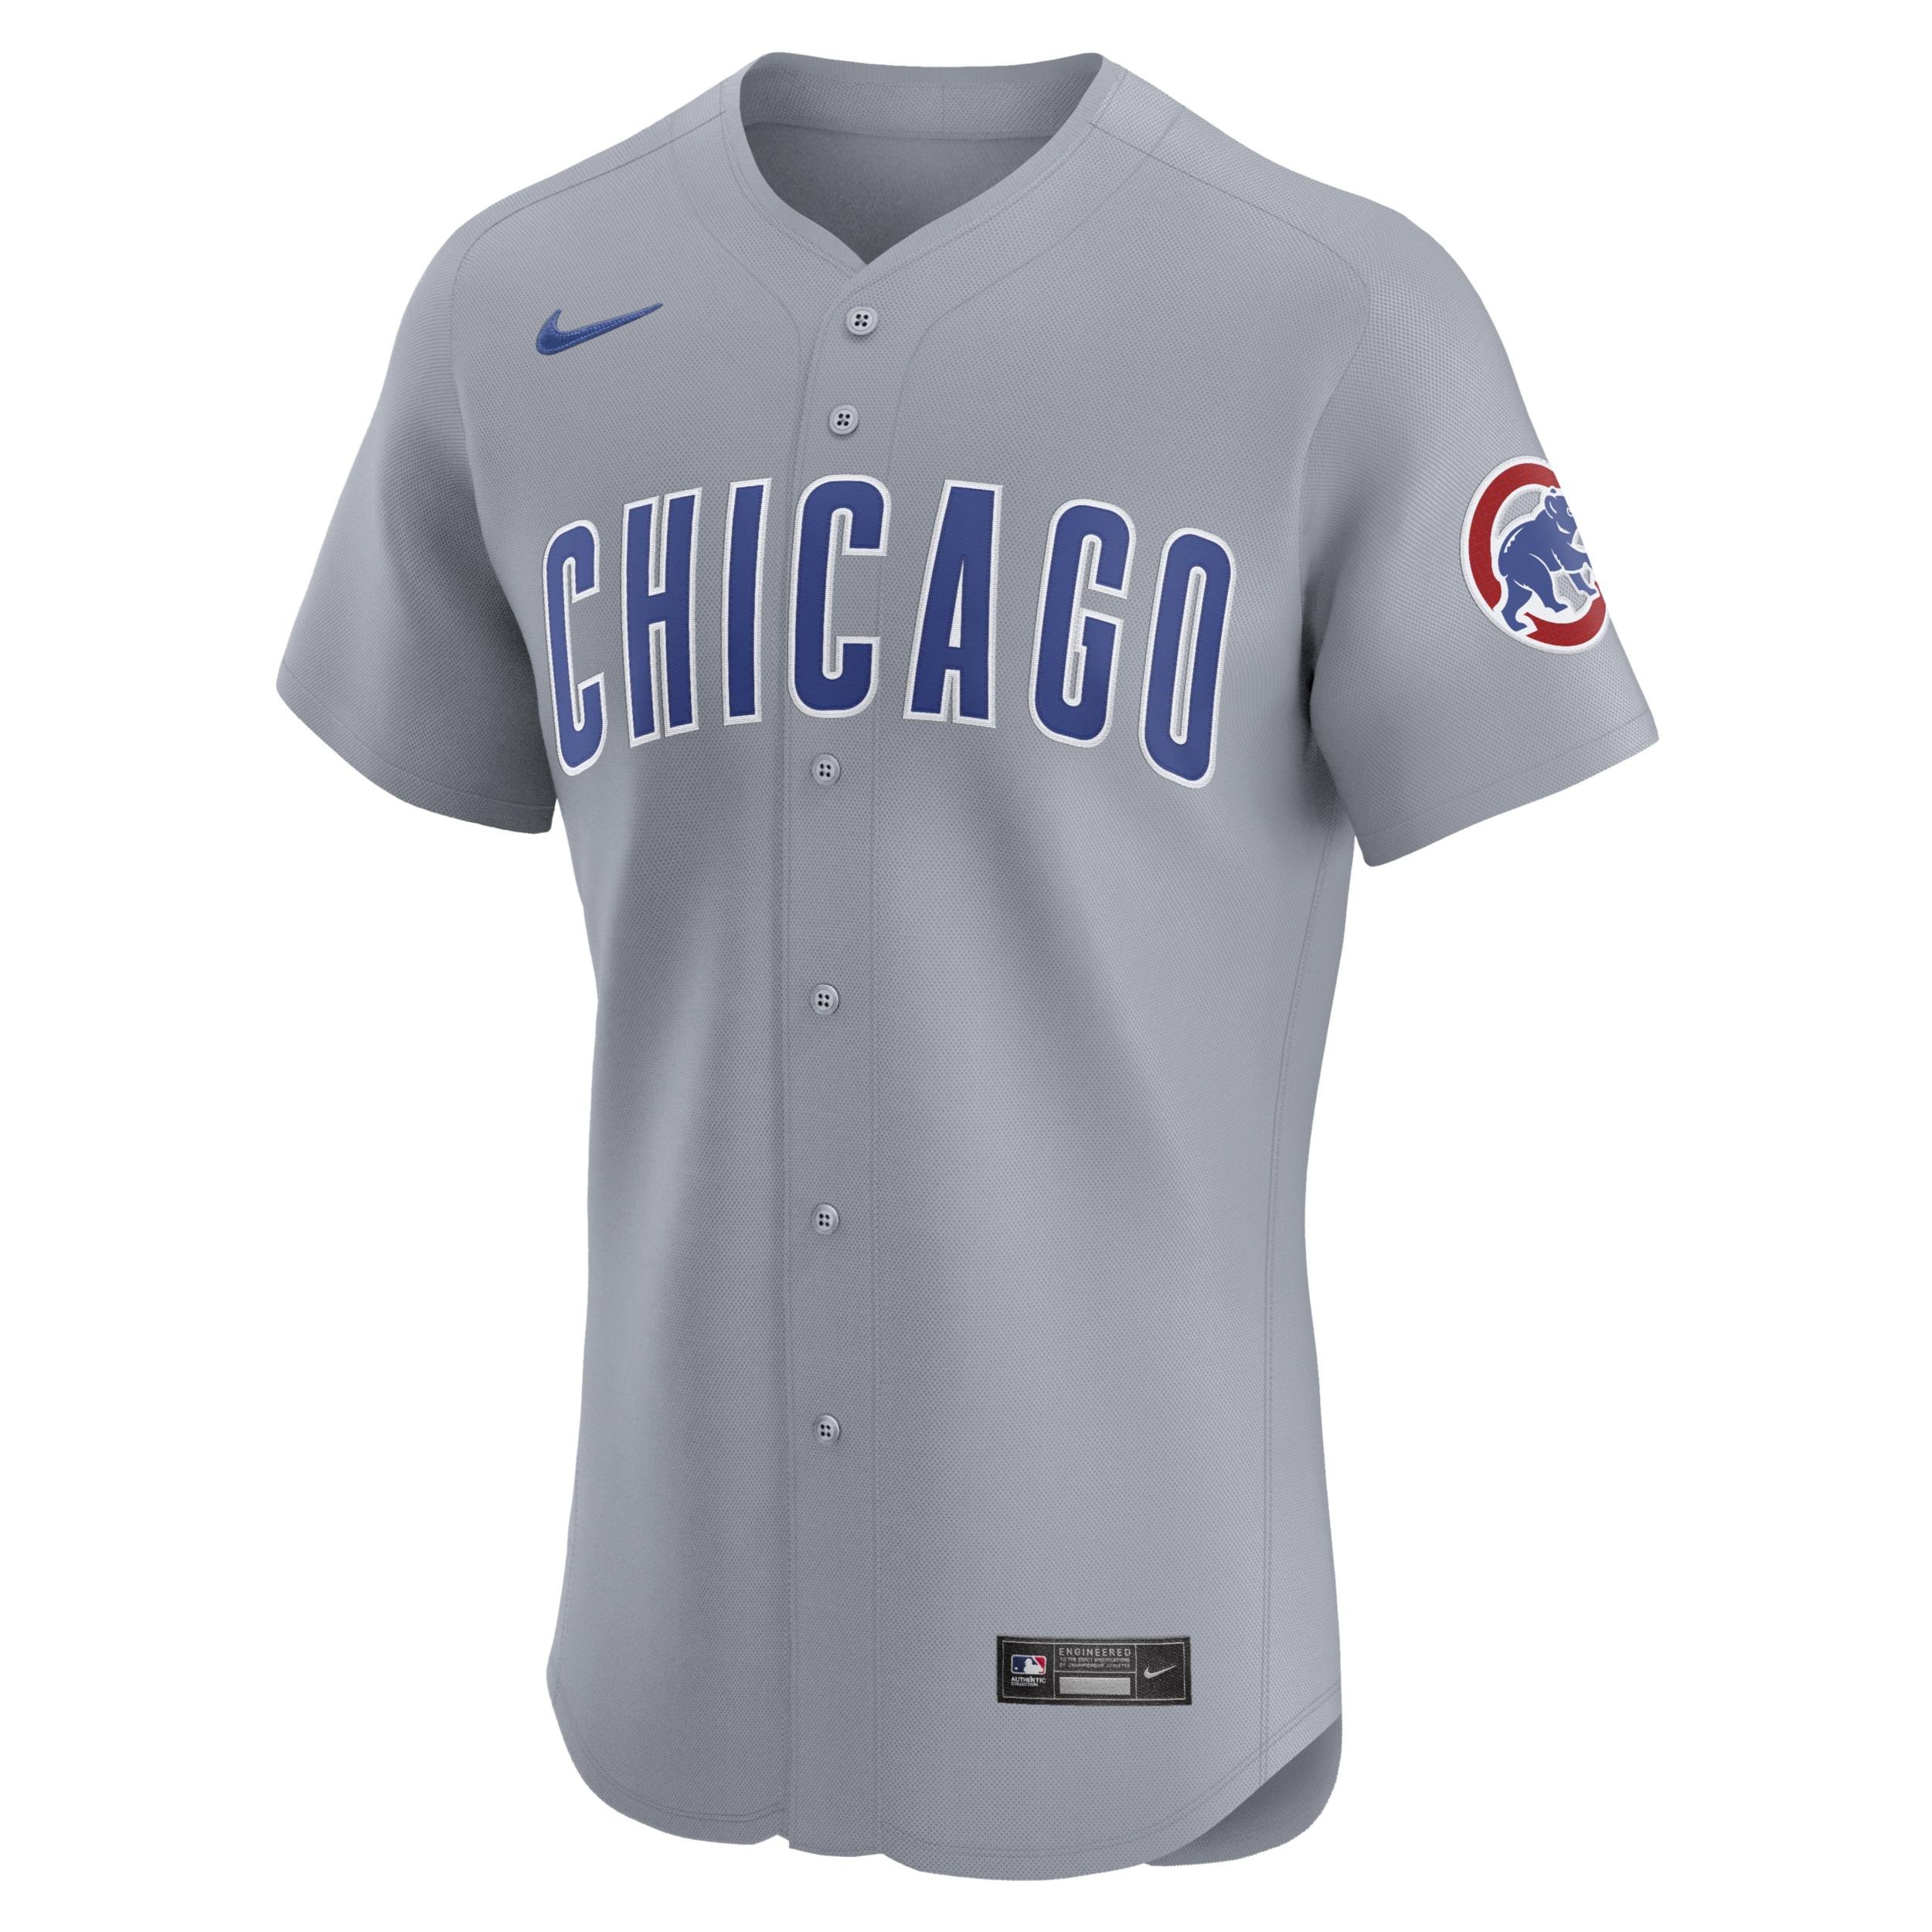 Chicago Cubs Nike Men's Dri-FIT ADV MLB Elite Jersey by NIKE